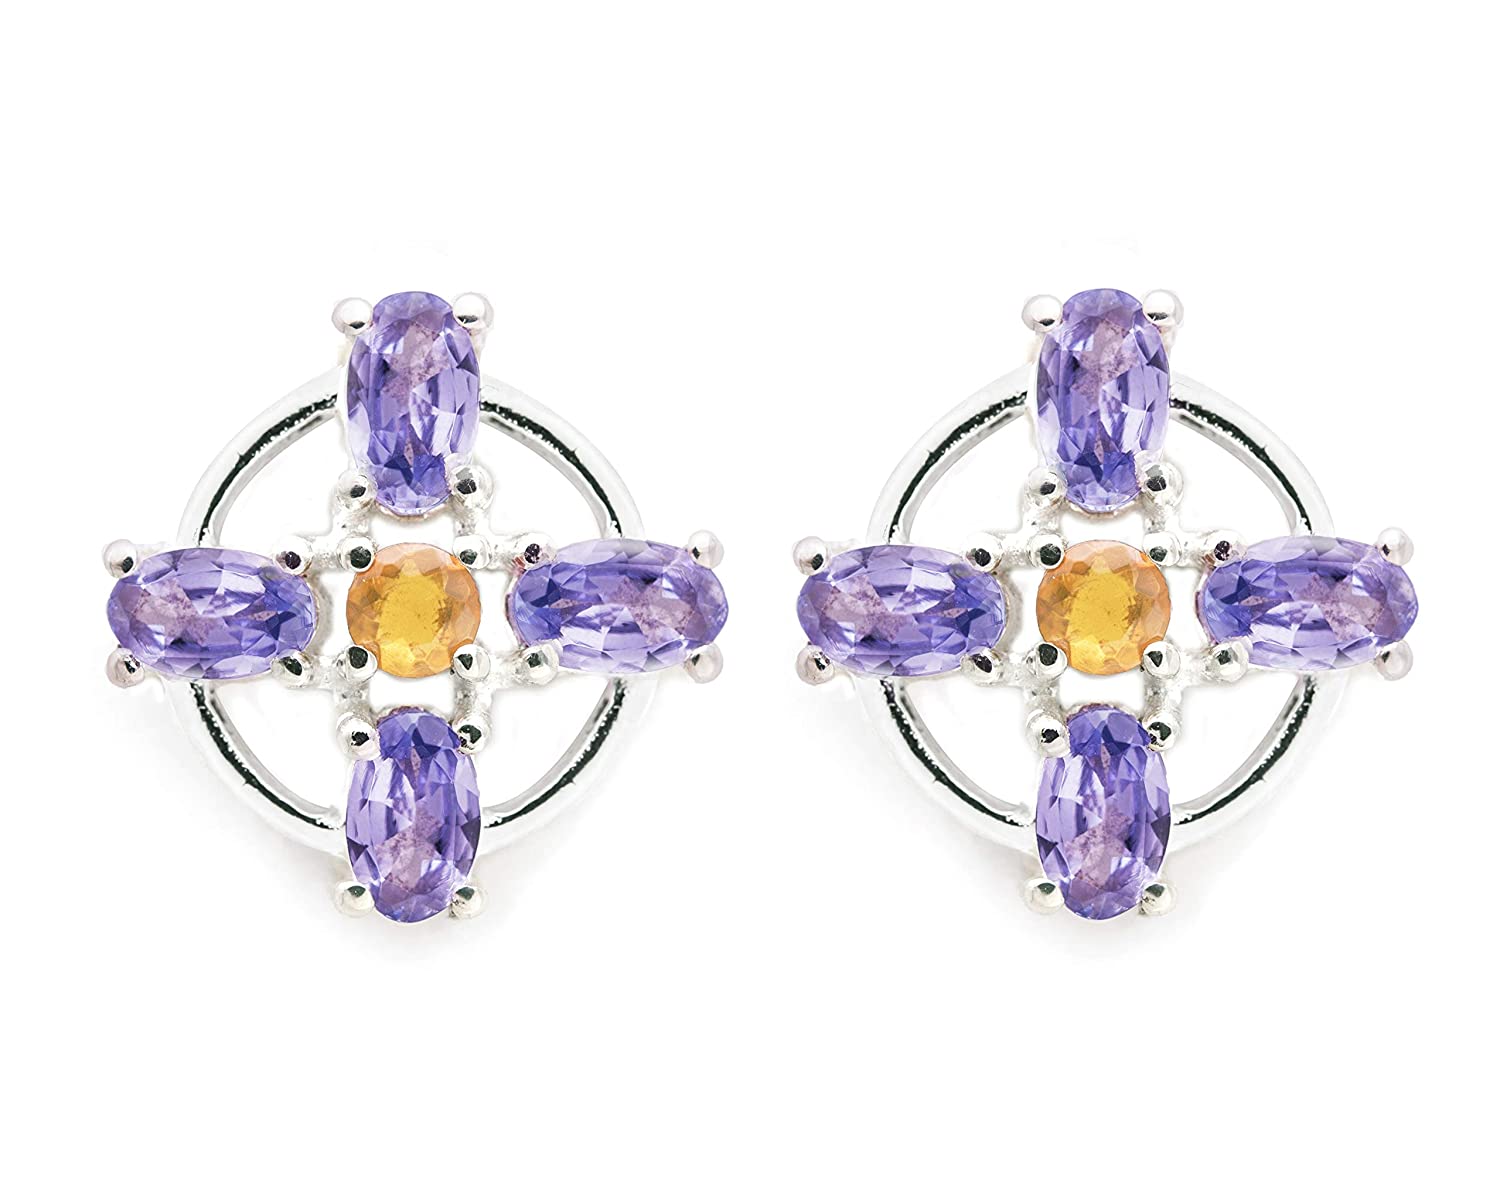 150 Carat TW Amethyst and Diamond Earrings in Yellow Gold